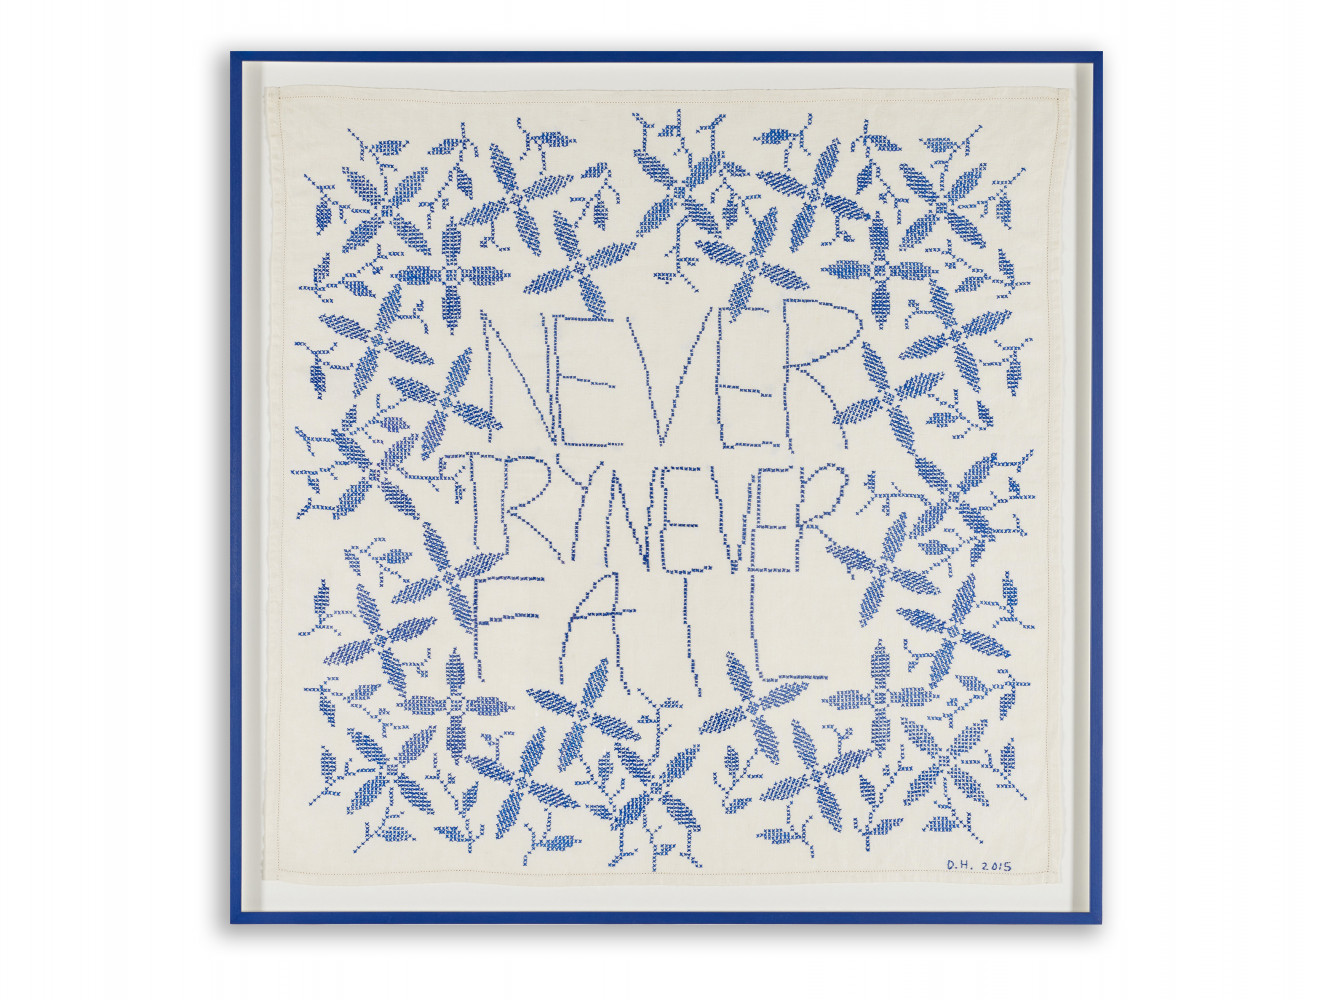 Des Hughes, ‘Never Try Never Fail’, 2015, Antique embroidery with cotton silk cross stitch on linen 